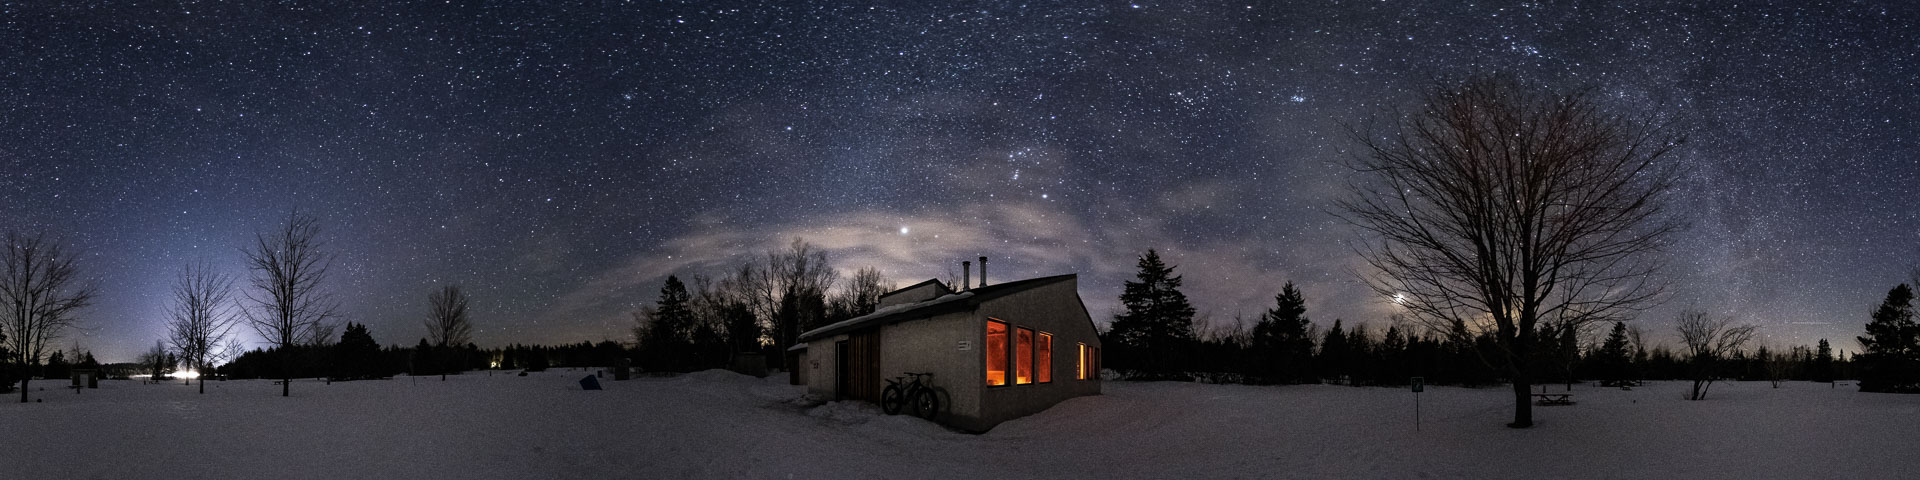 A shelter at night under the stars in the winter time